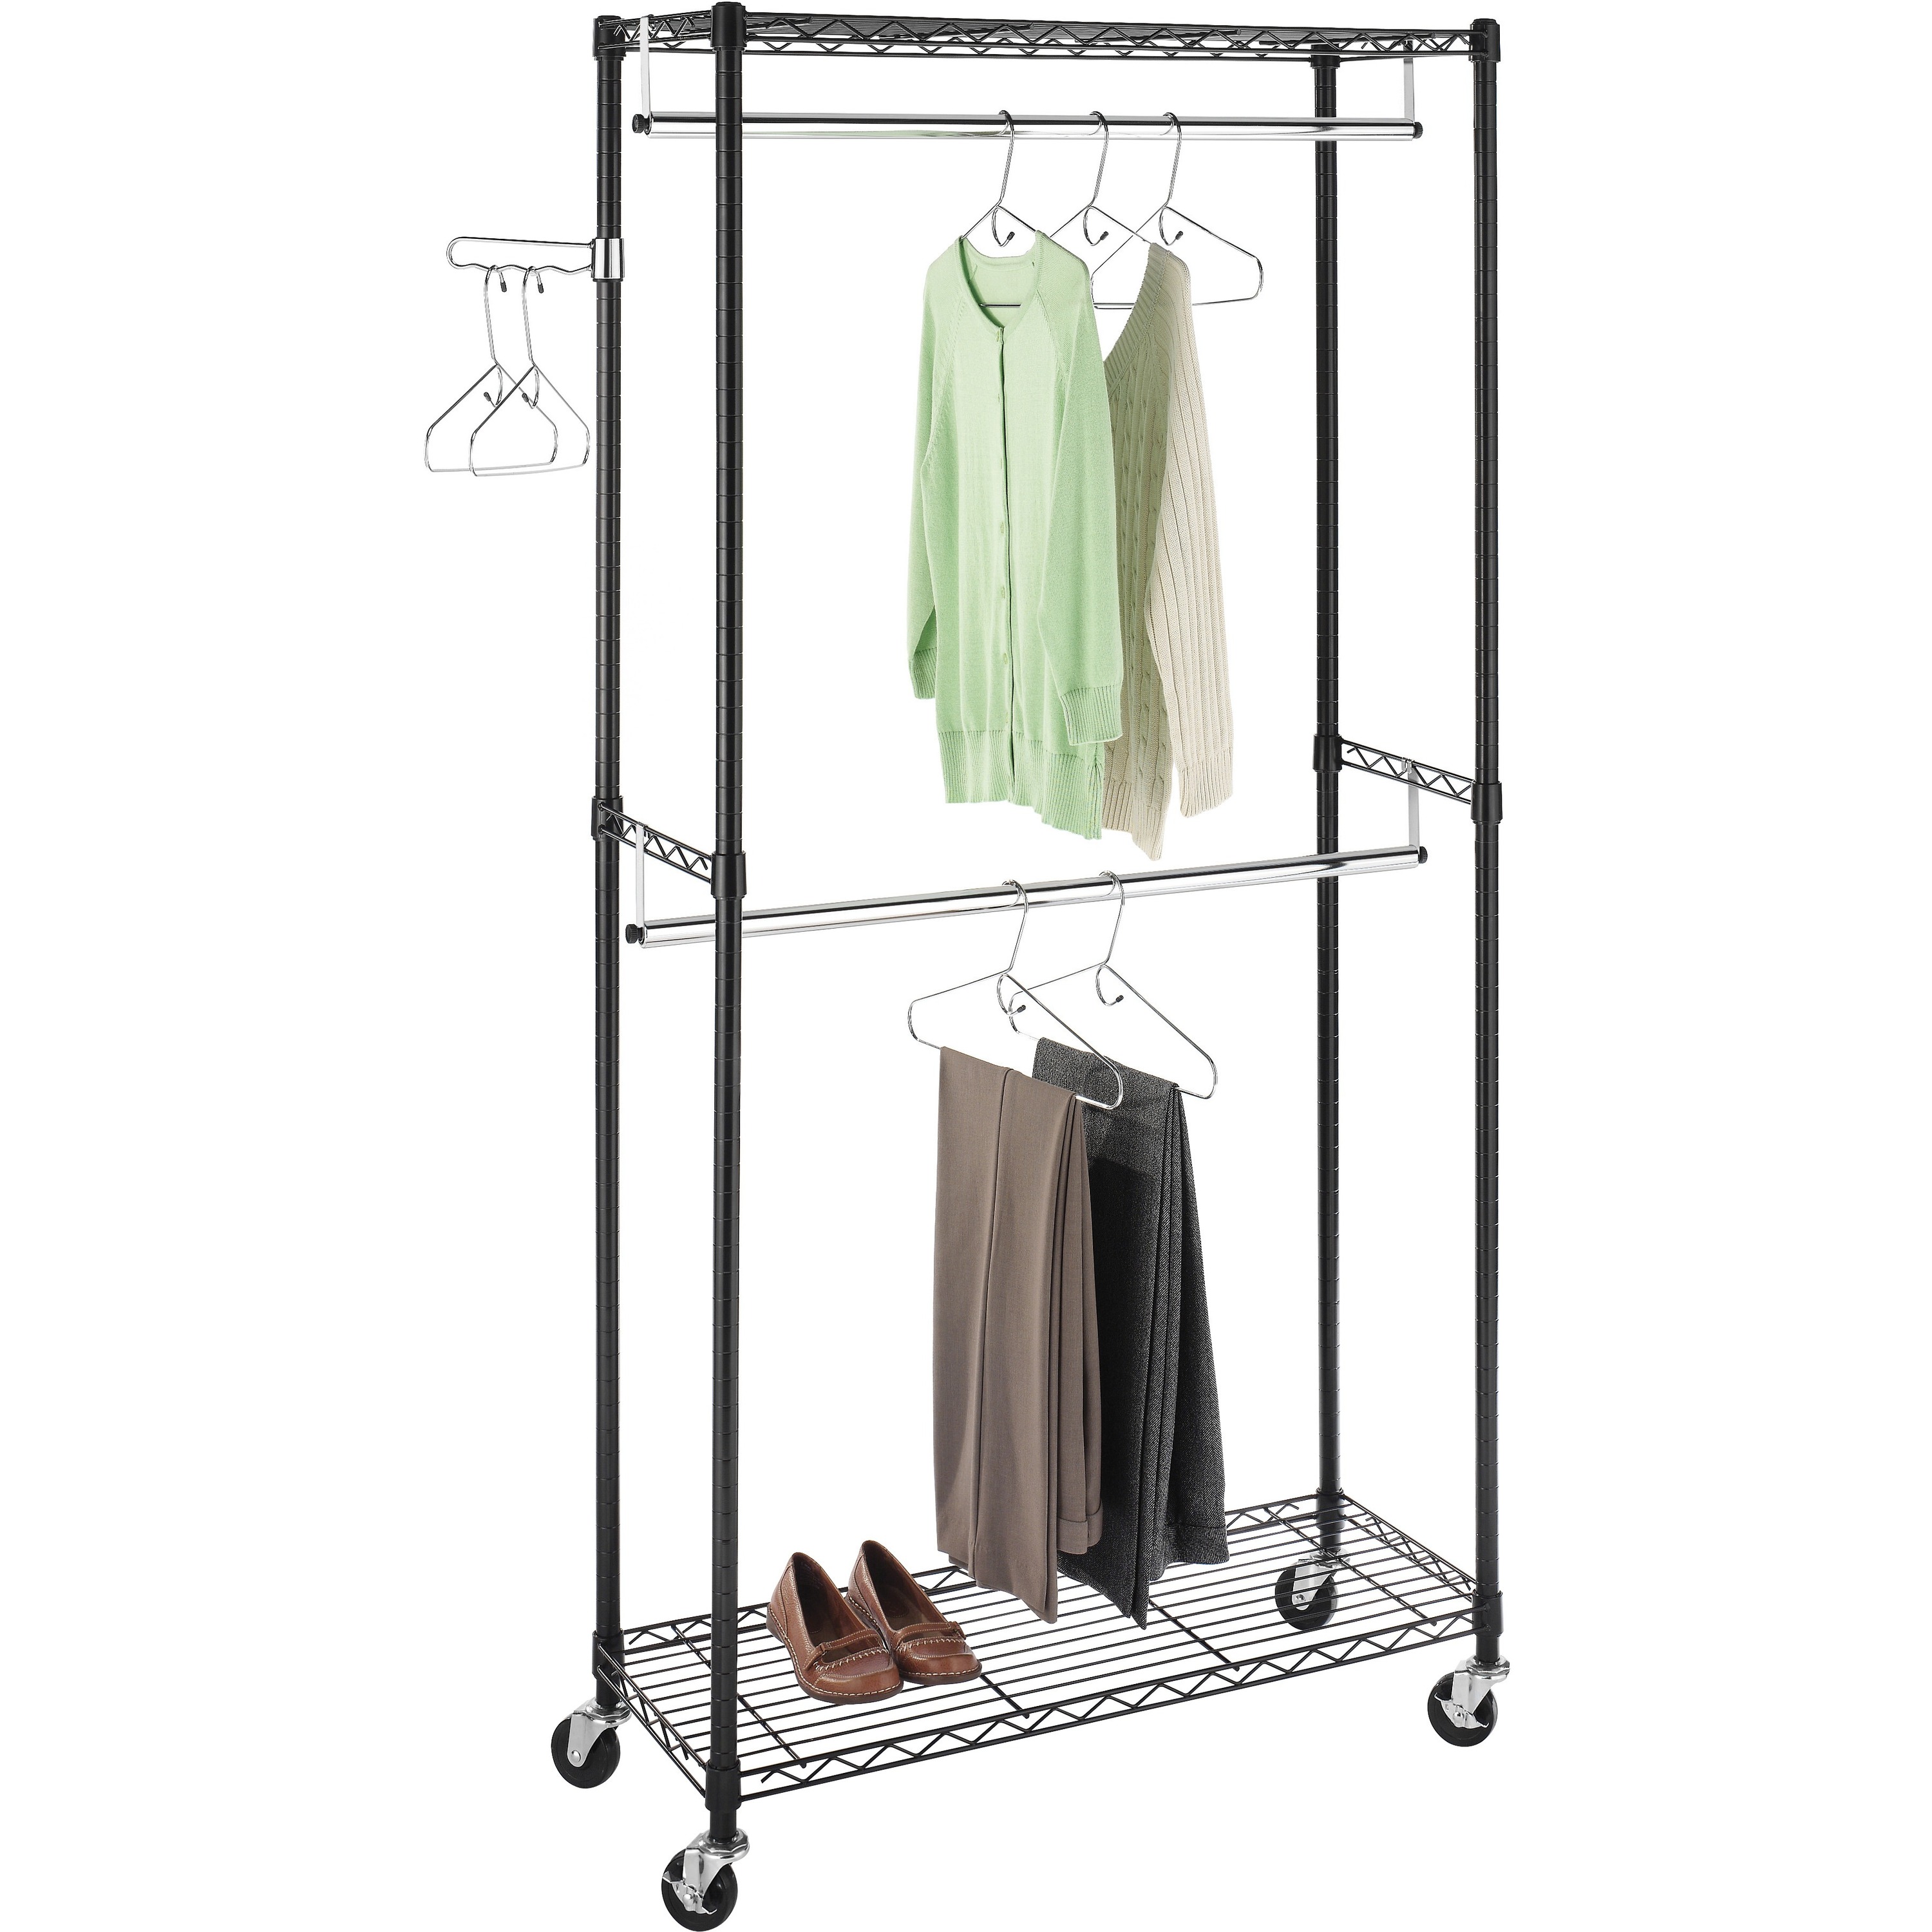 Whitmor Double Rod Rolling Garment Rack, Metal, Black and Chrome - image 4 of 8